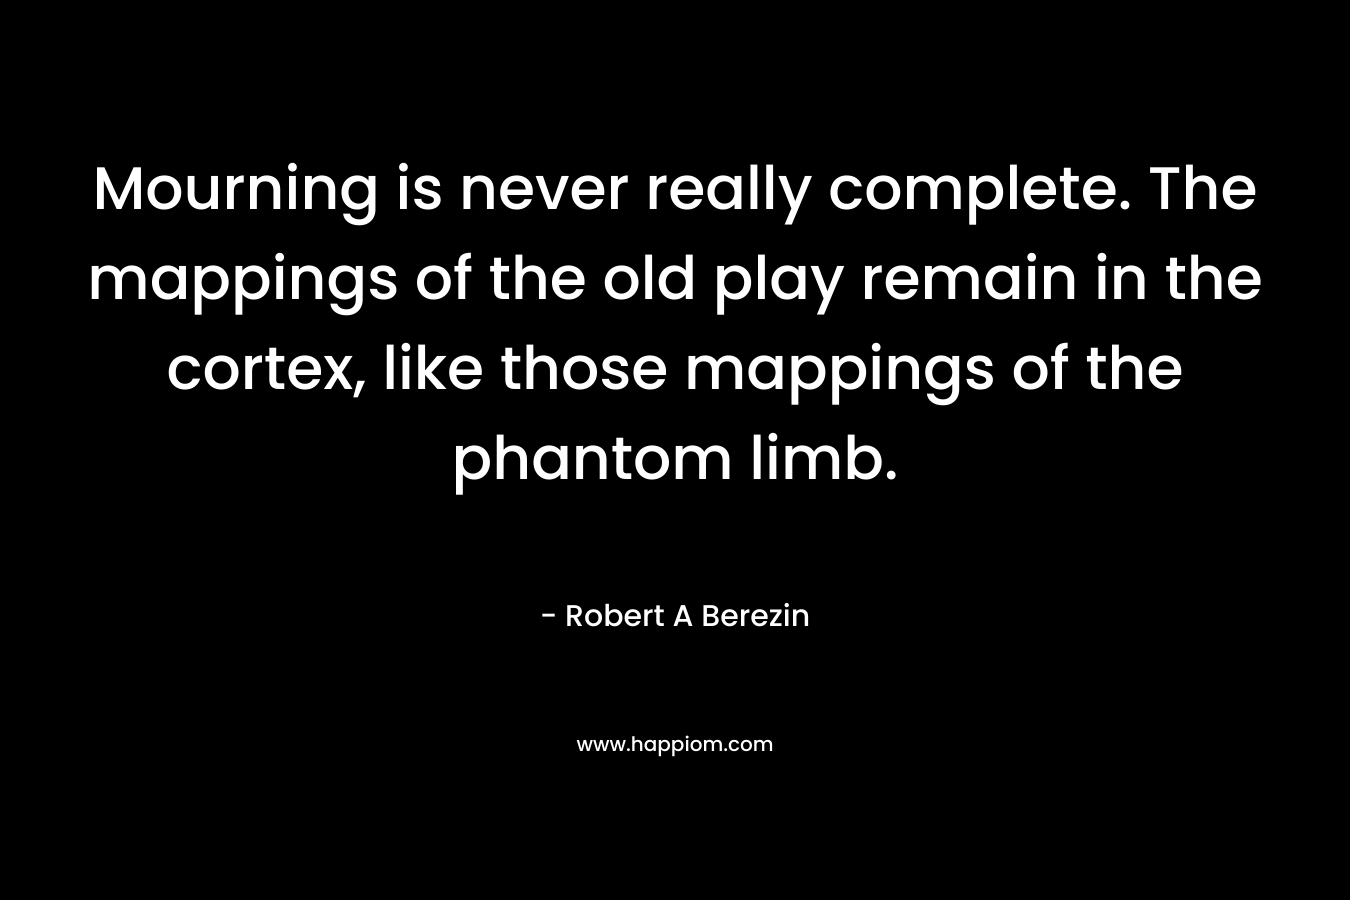 Mourning is never really complete. The mappings of the old play remain in the cortex, like those mappings of the phantom limb. – Robert A Berezin